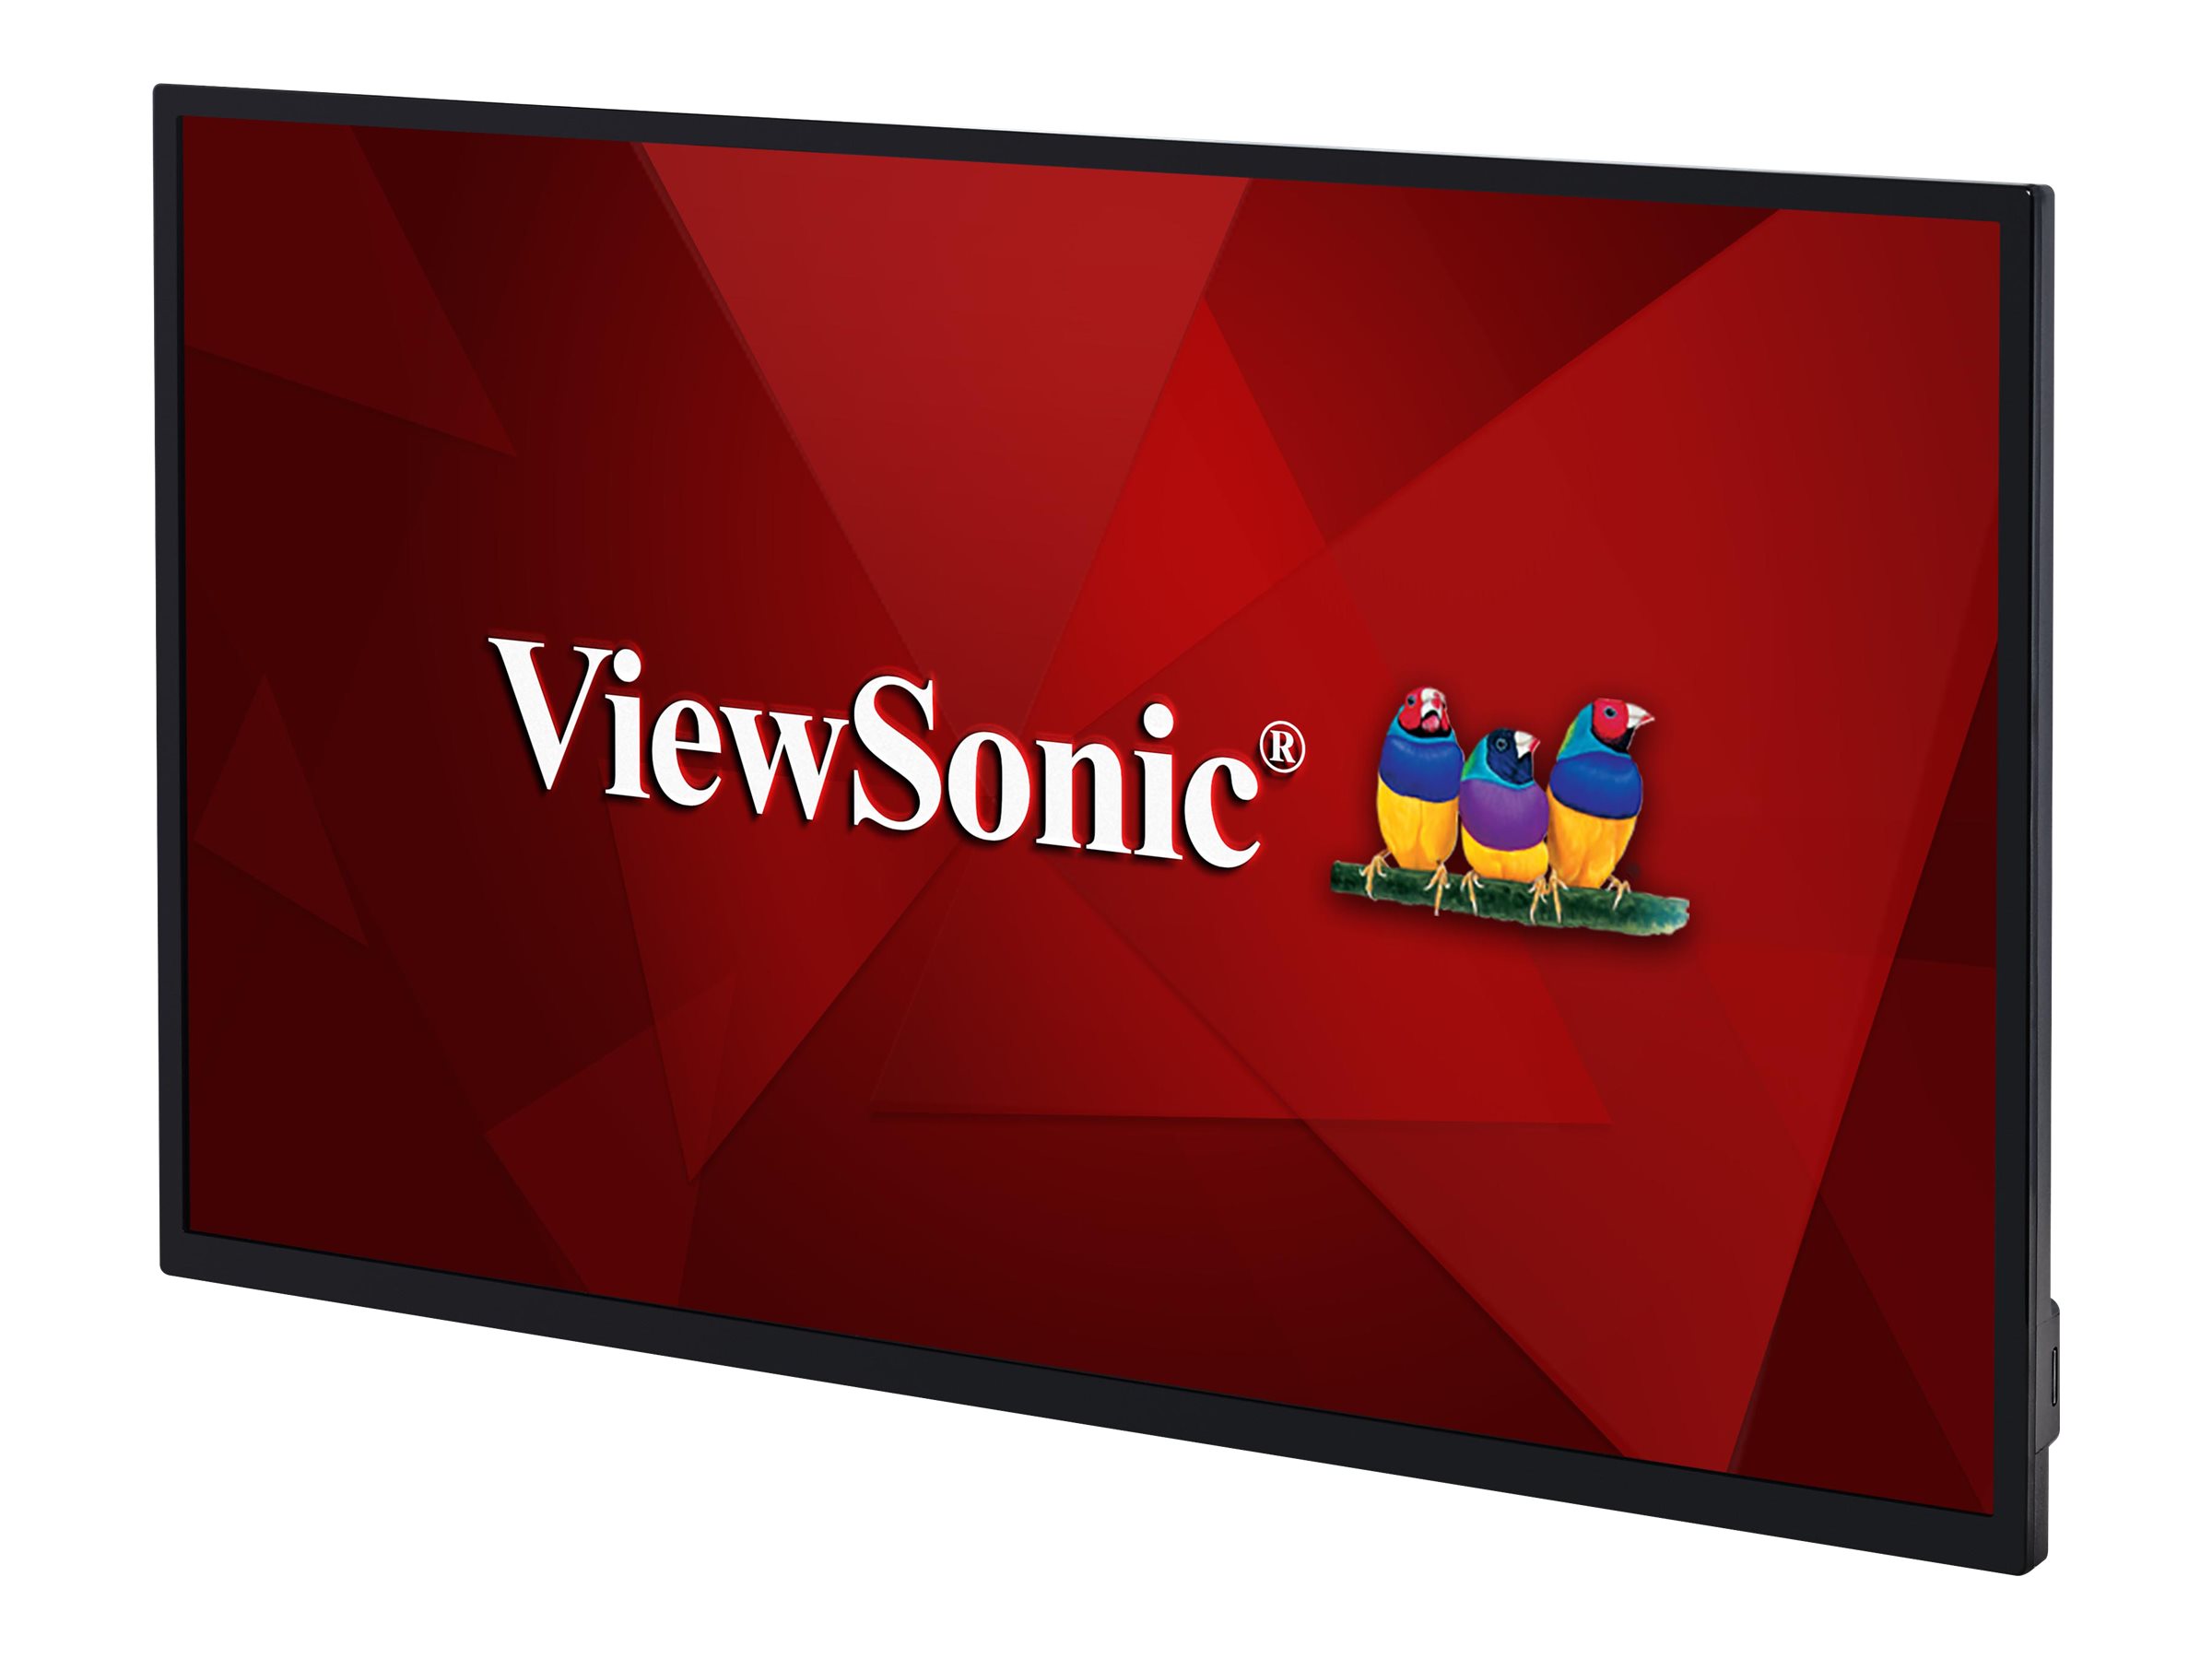 Viewsonic Cde3205 - 32" Diagonal Class (31.5" Viewable) Led-backlit Lcd Display - Signage / Hospitality - 1080p (full Hd) 1920 X 1080 - image 2 of 5